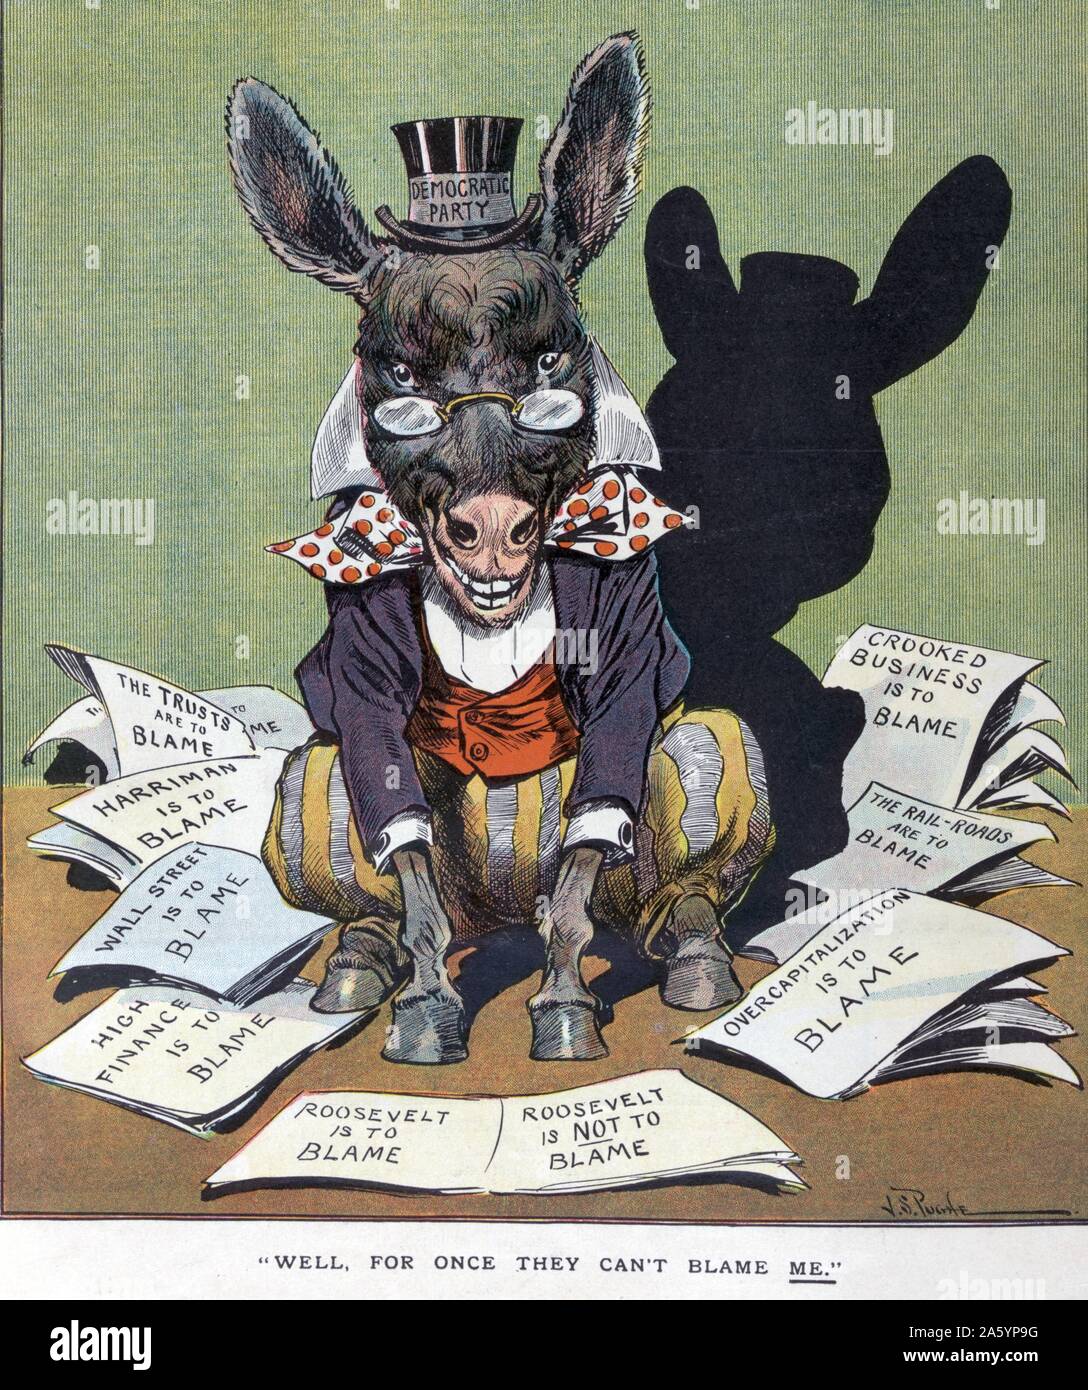 Well, for once they can't blame me by J.S. Pughe, 1870-1909, artist. Published 1907. Illustration shows the Democratic donkey labelled 'Democratic Party' sitting among papers that state 'The Trusts are to Blame', 'Harriman is to Blame', 'Wall Street is to Blame', 'High Finance is to Blame', 'Roosevelt is to Blame / Roosevelt is Not to Blame', 'Overcapitalization is to Blame', 'The Rail-Roads are to Blame', 'Crooked Business is to Blame'. Many are blamed, but no one will accept the responsibility for the panic of 1907. Stock Photo